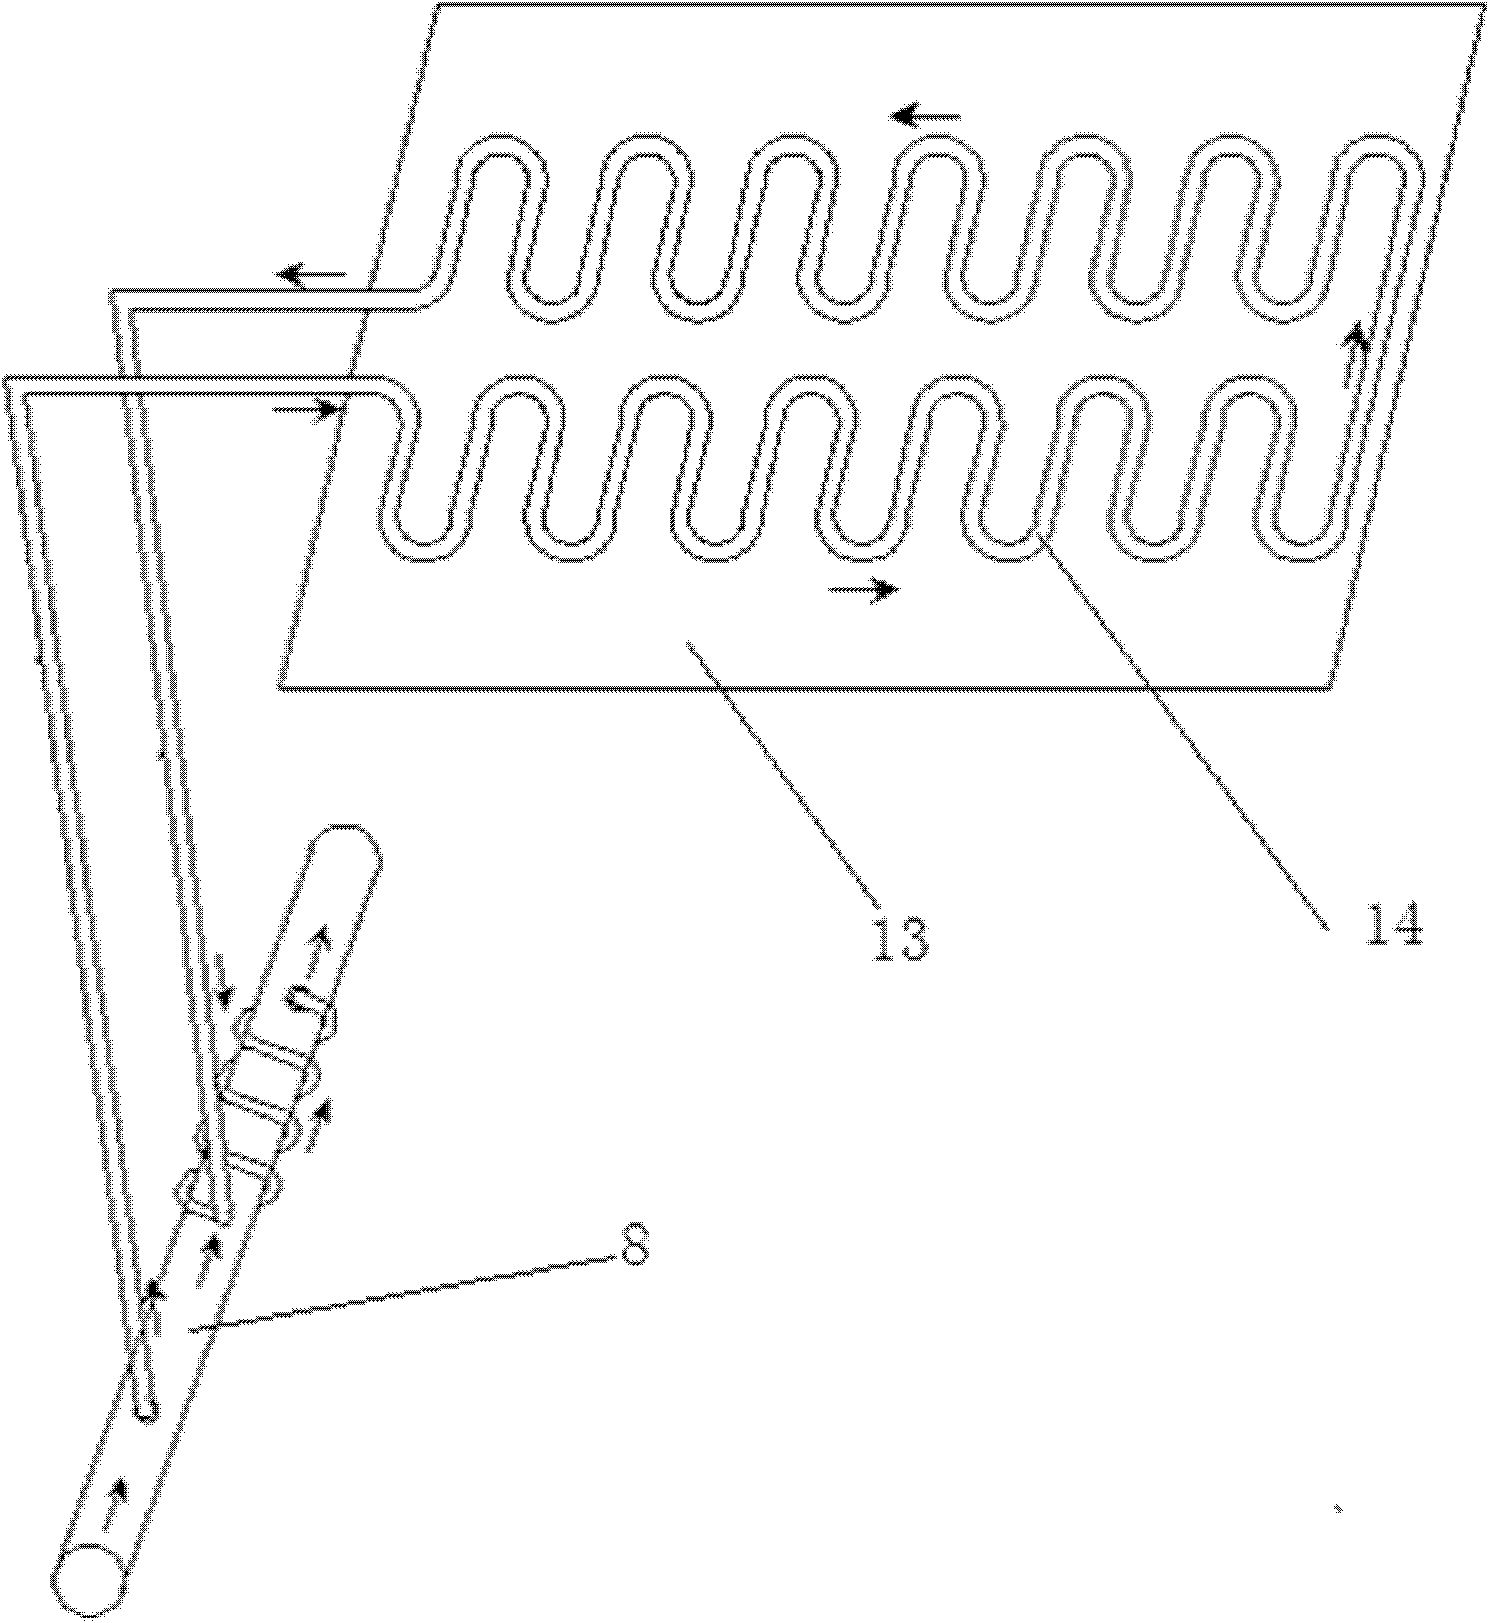 Generation system using temperature difference between city asphalt pavement and underground water source pipeline